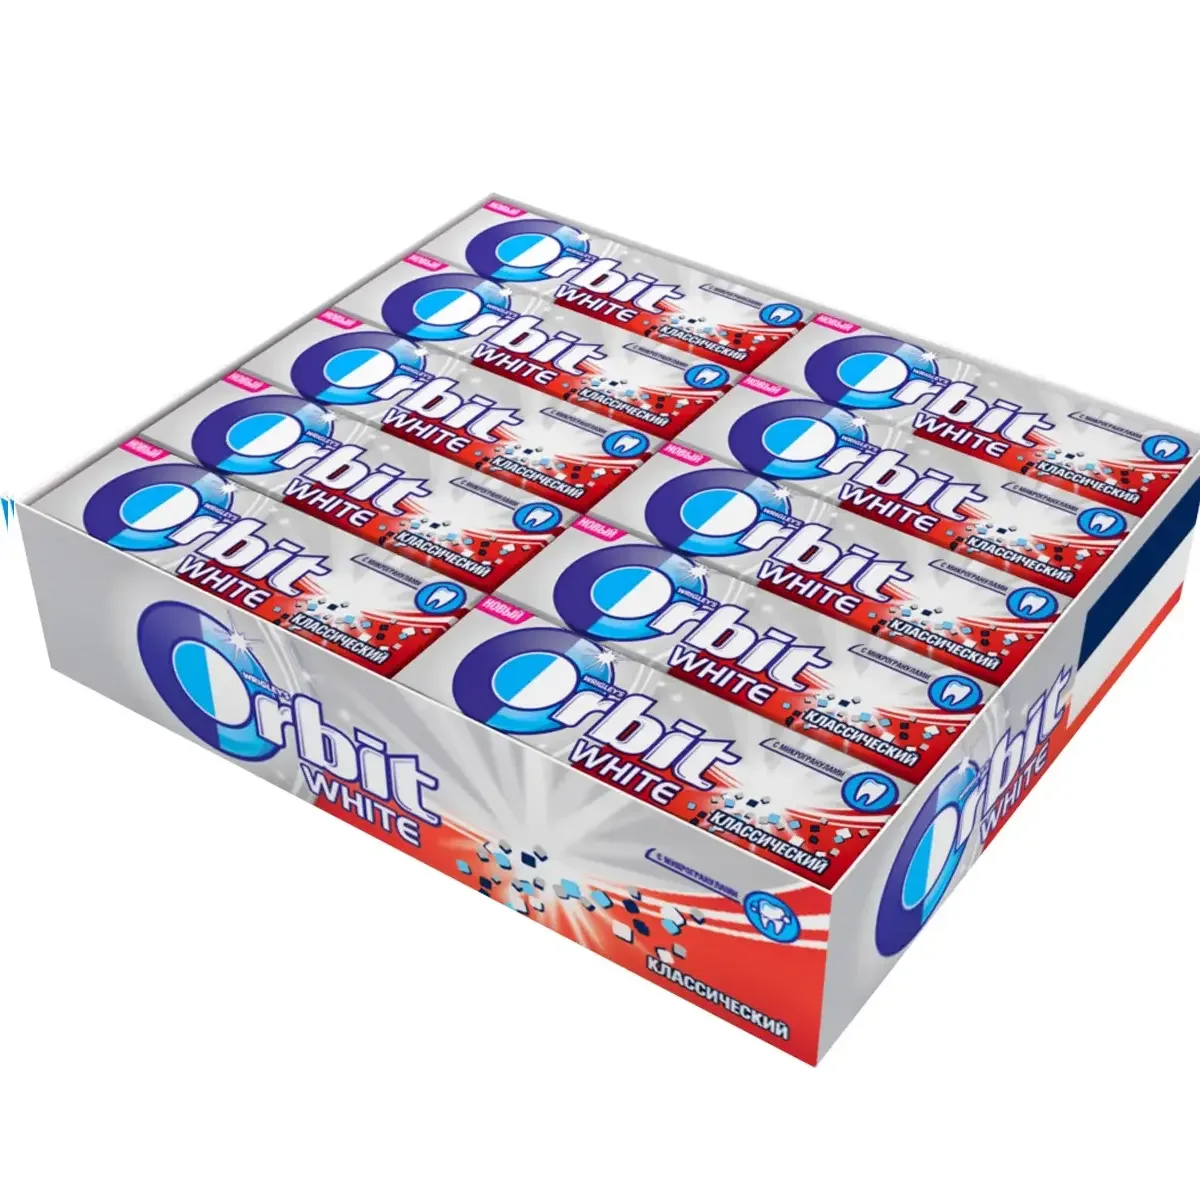 Chewing gum Delicate mint Orbit Snow-white, 13.6g Buy for 0